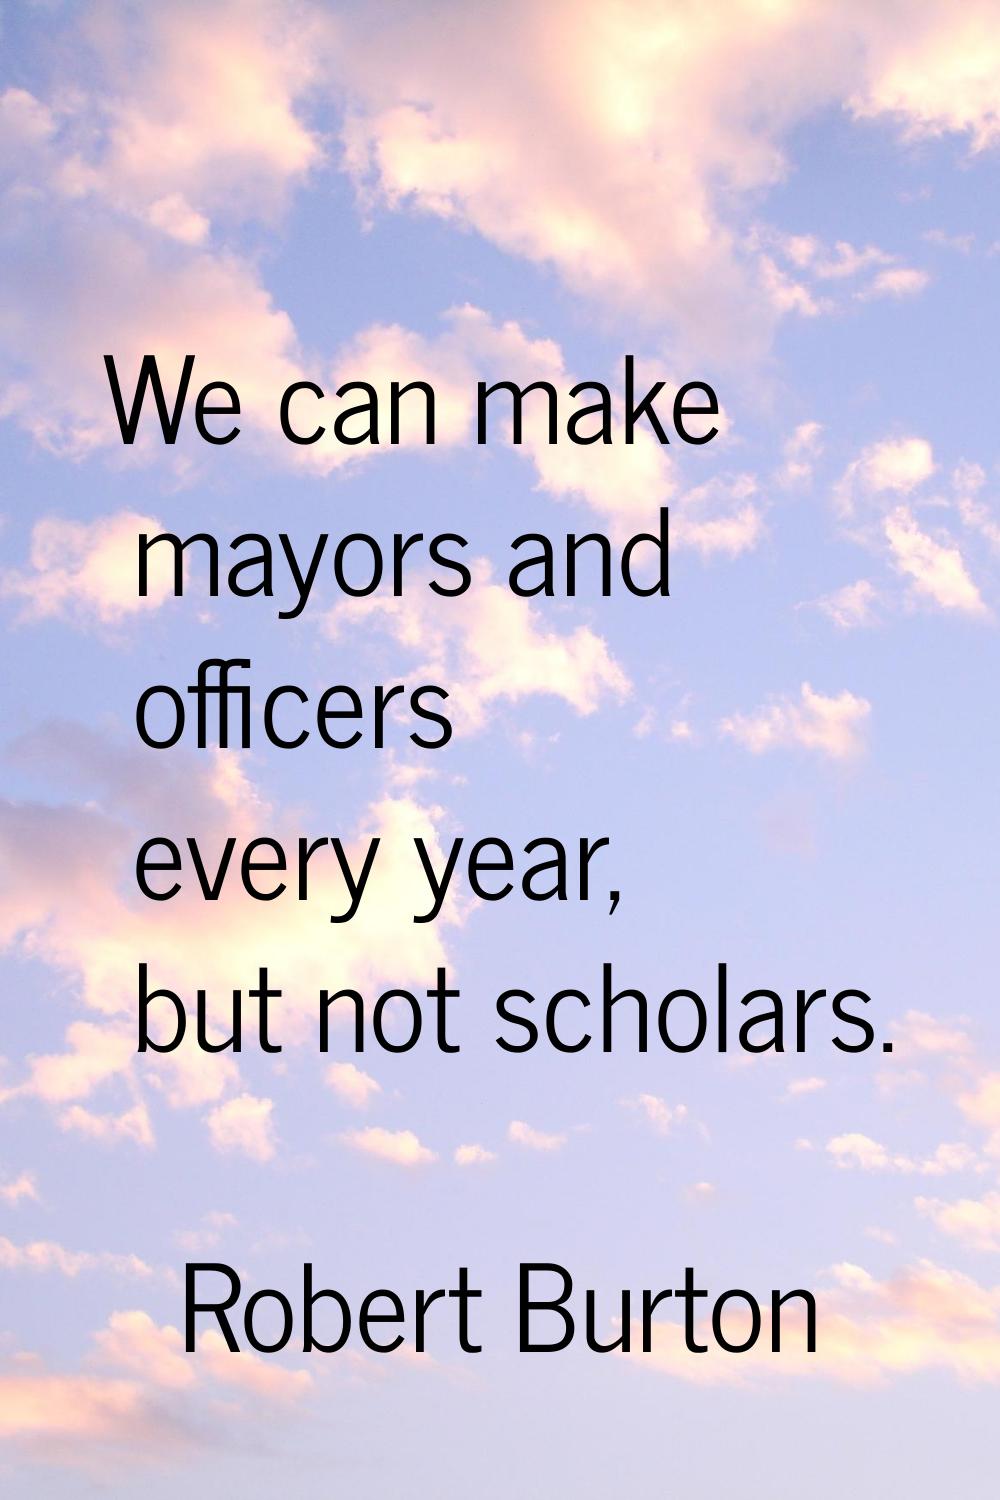 We can make mayors and officers every year, but not scholars.